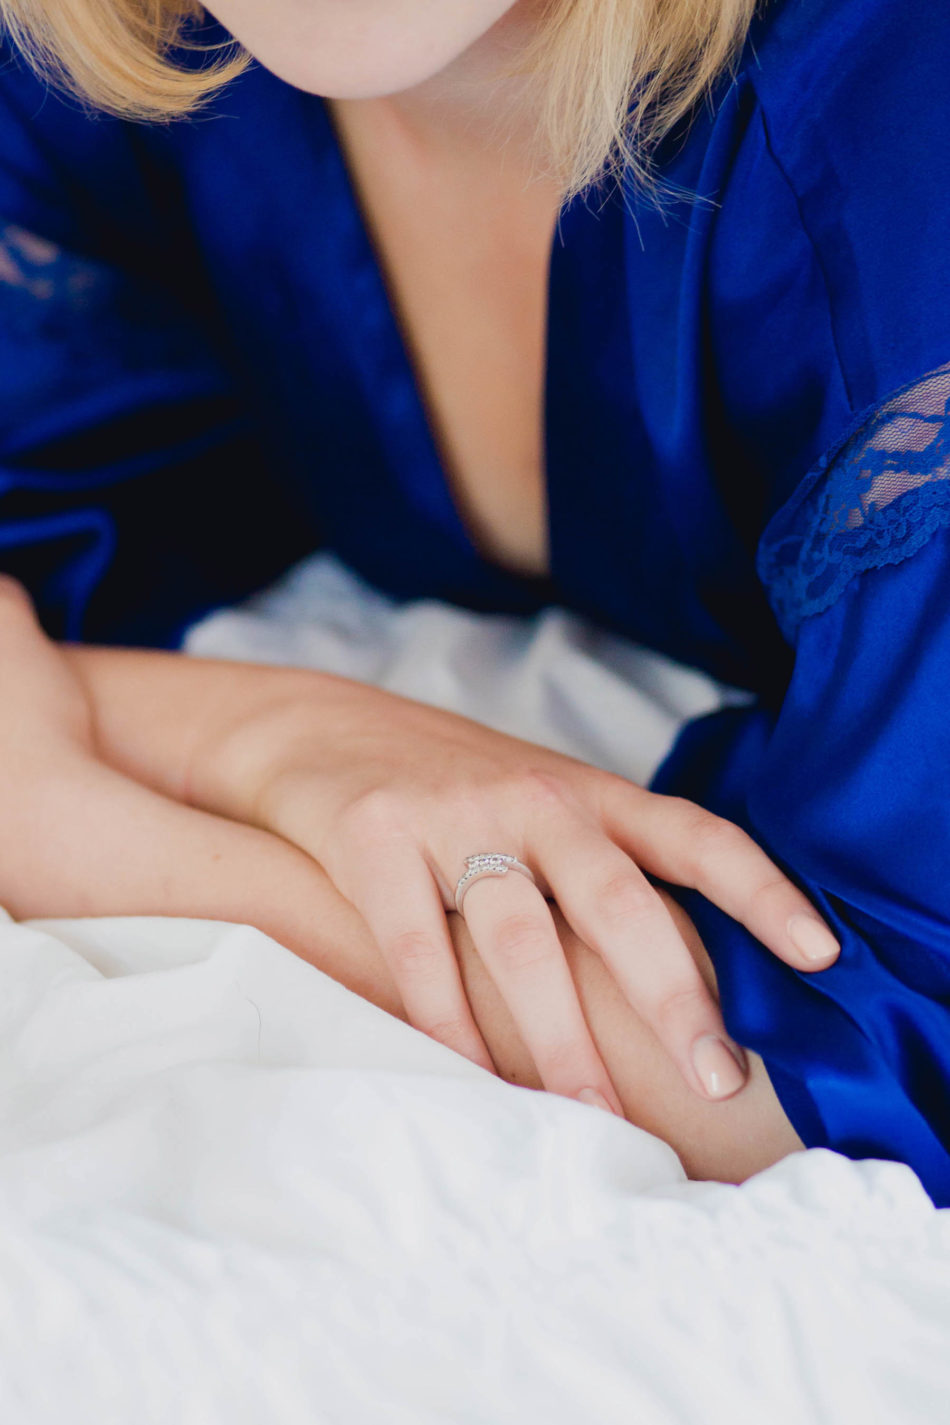 Ms M wears a silky navy blue robe in bed, Boudoir Photography, Charleston, SC Kate Timbers Photography. http://katetimbers.com #katetimbersphotography // Charleston Photography // Inspiration